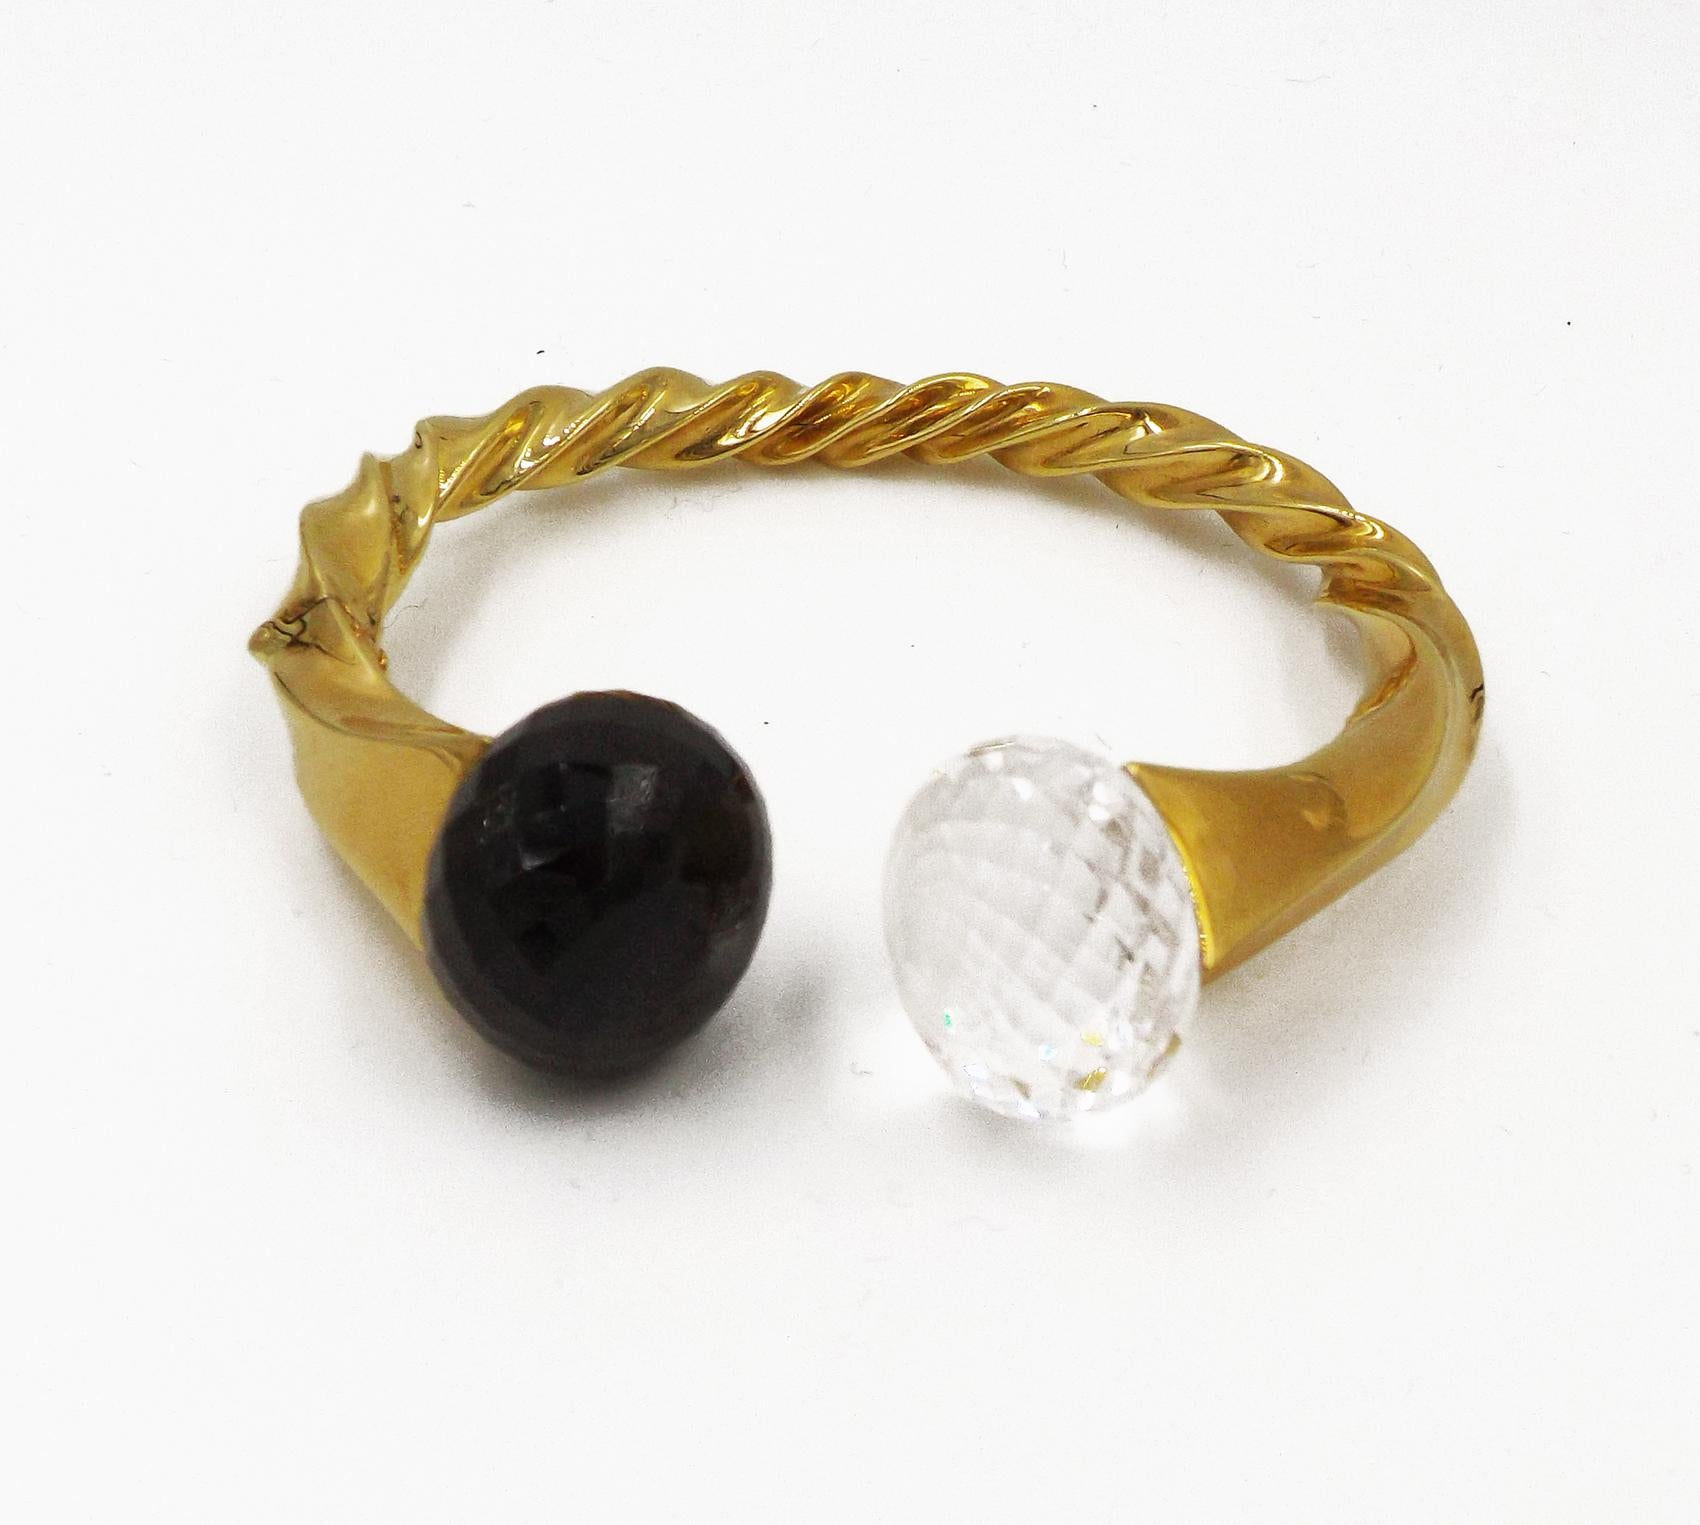 Composed of twisted gold set at the terminals with a faceted rock crystal and black spinel, internal circumference 6 inches, signed Verdura. Signed Verdura. Stamped 750 for 18 karat gold. Gross weight approximately 32 dwts. Inner circumference